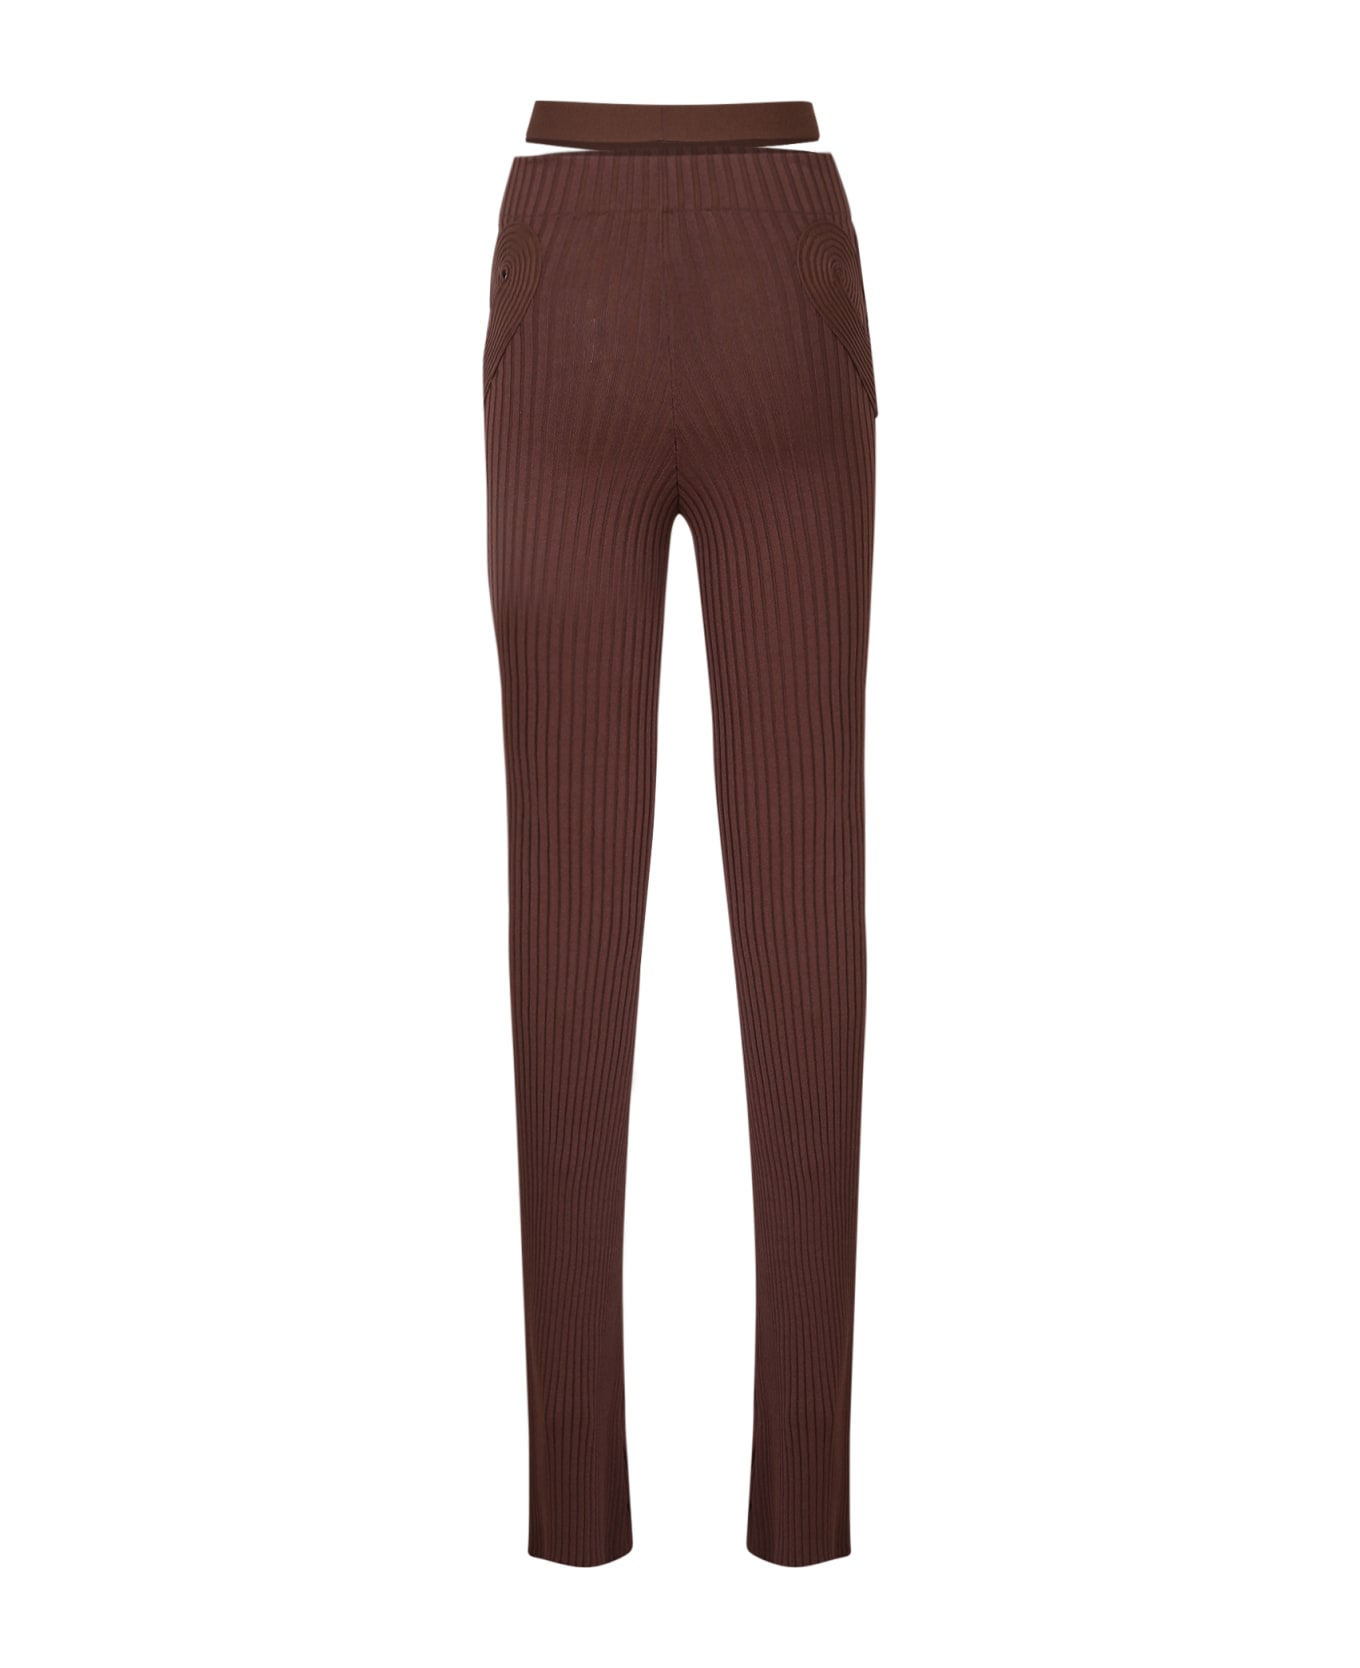 ANDREĀDAMO Ribbed Knit Slim Trousers - Brown